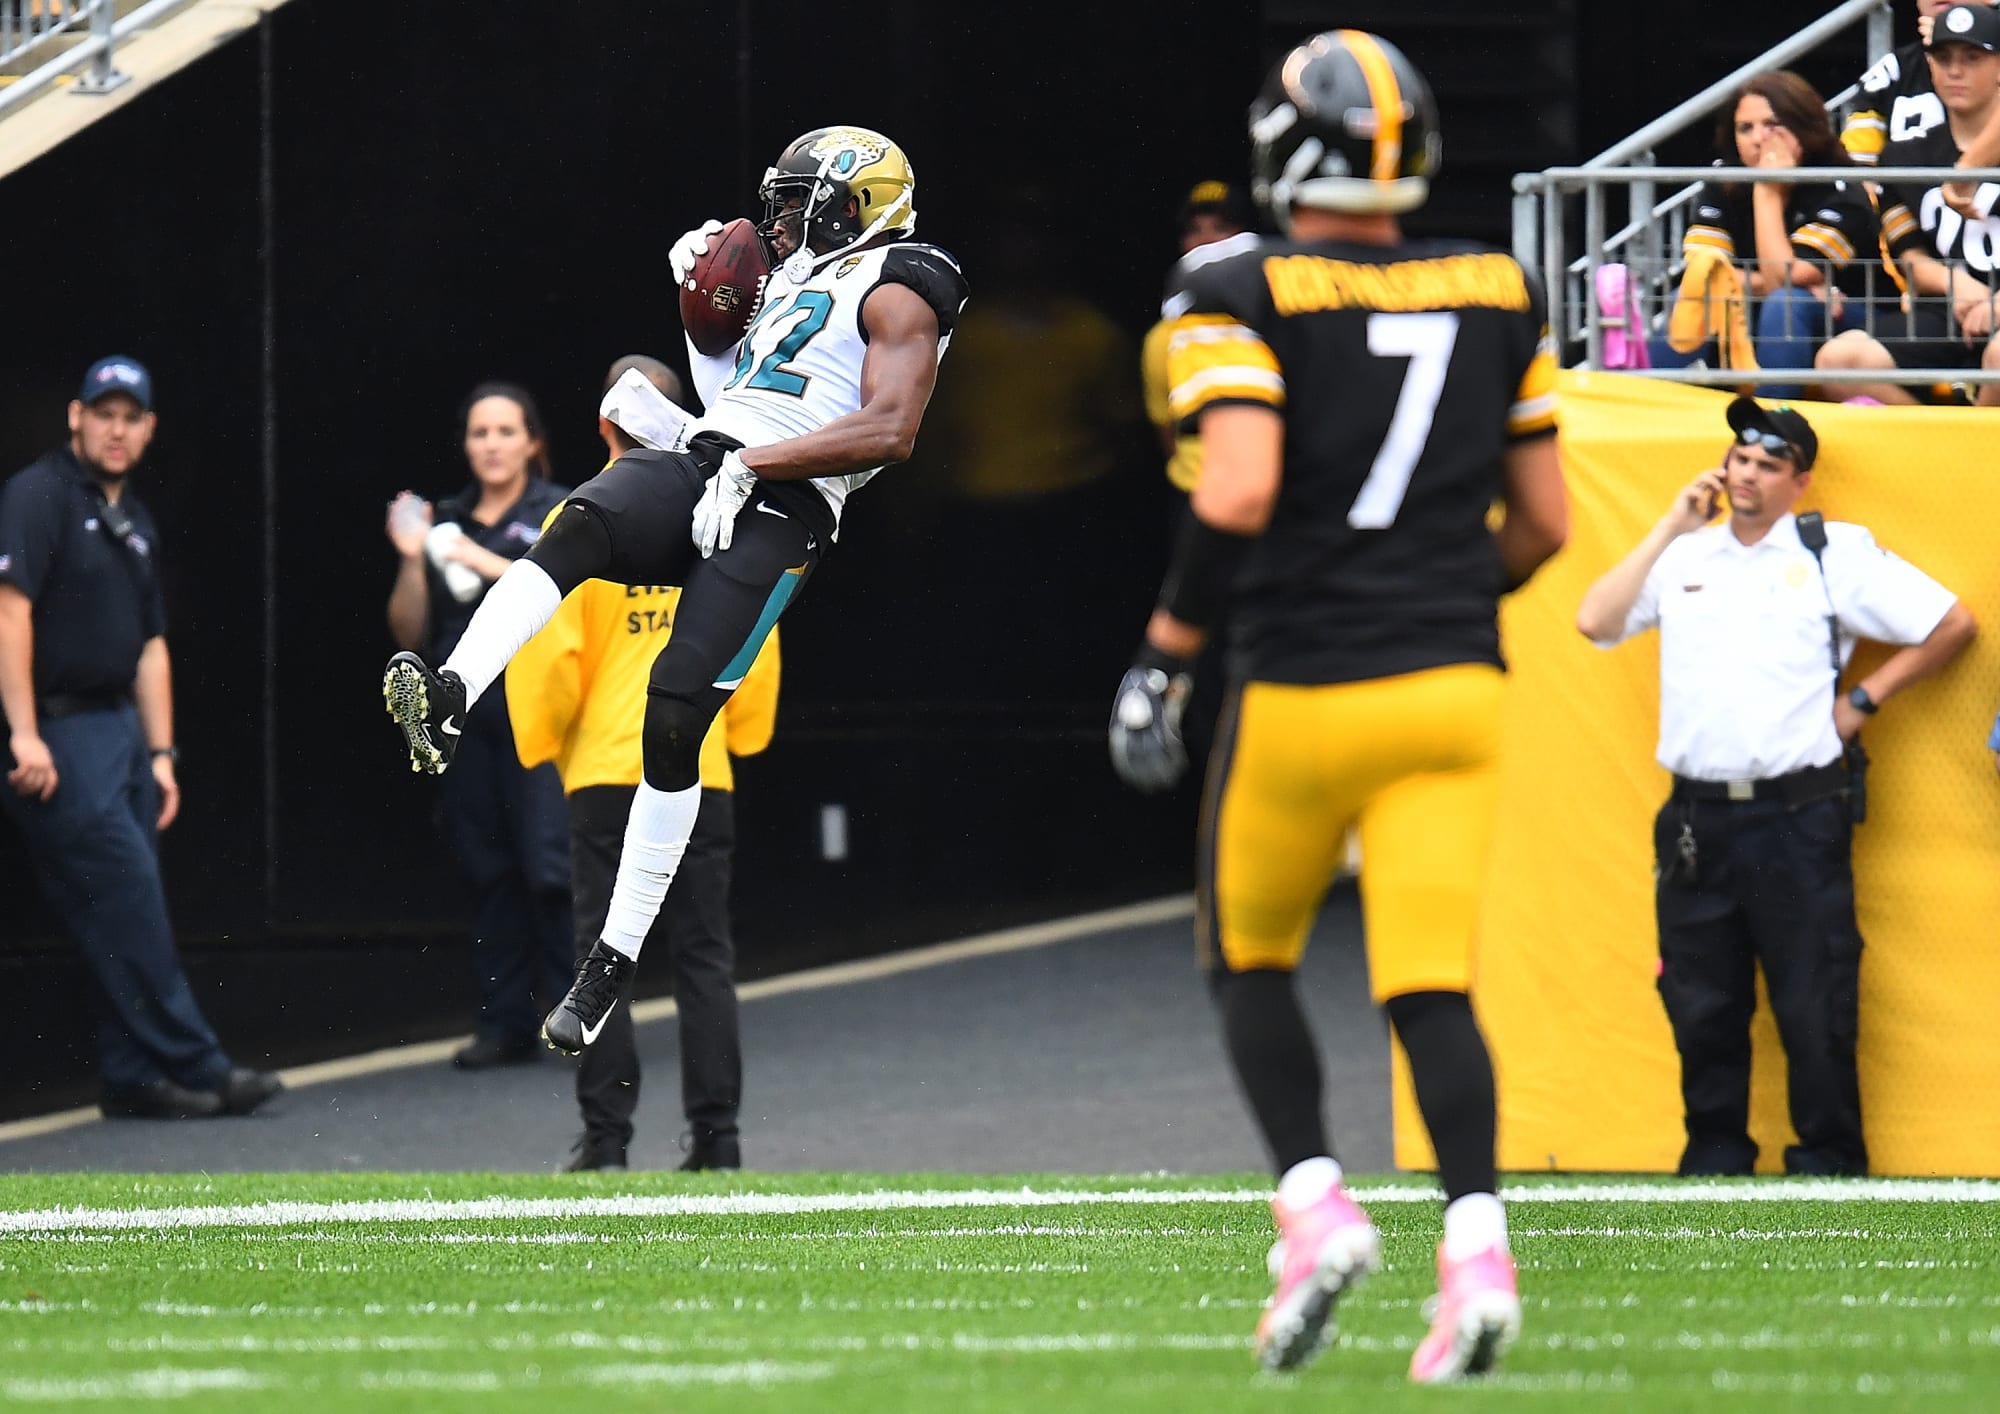 Jacksonville Jaguars Defense the driving, dominant force in third win